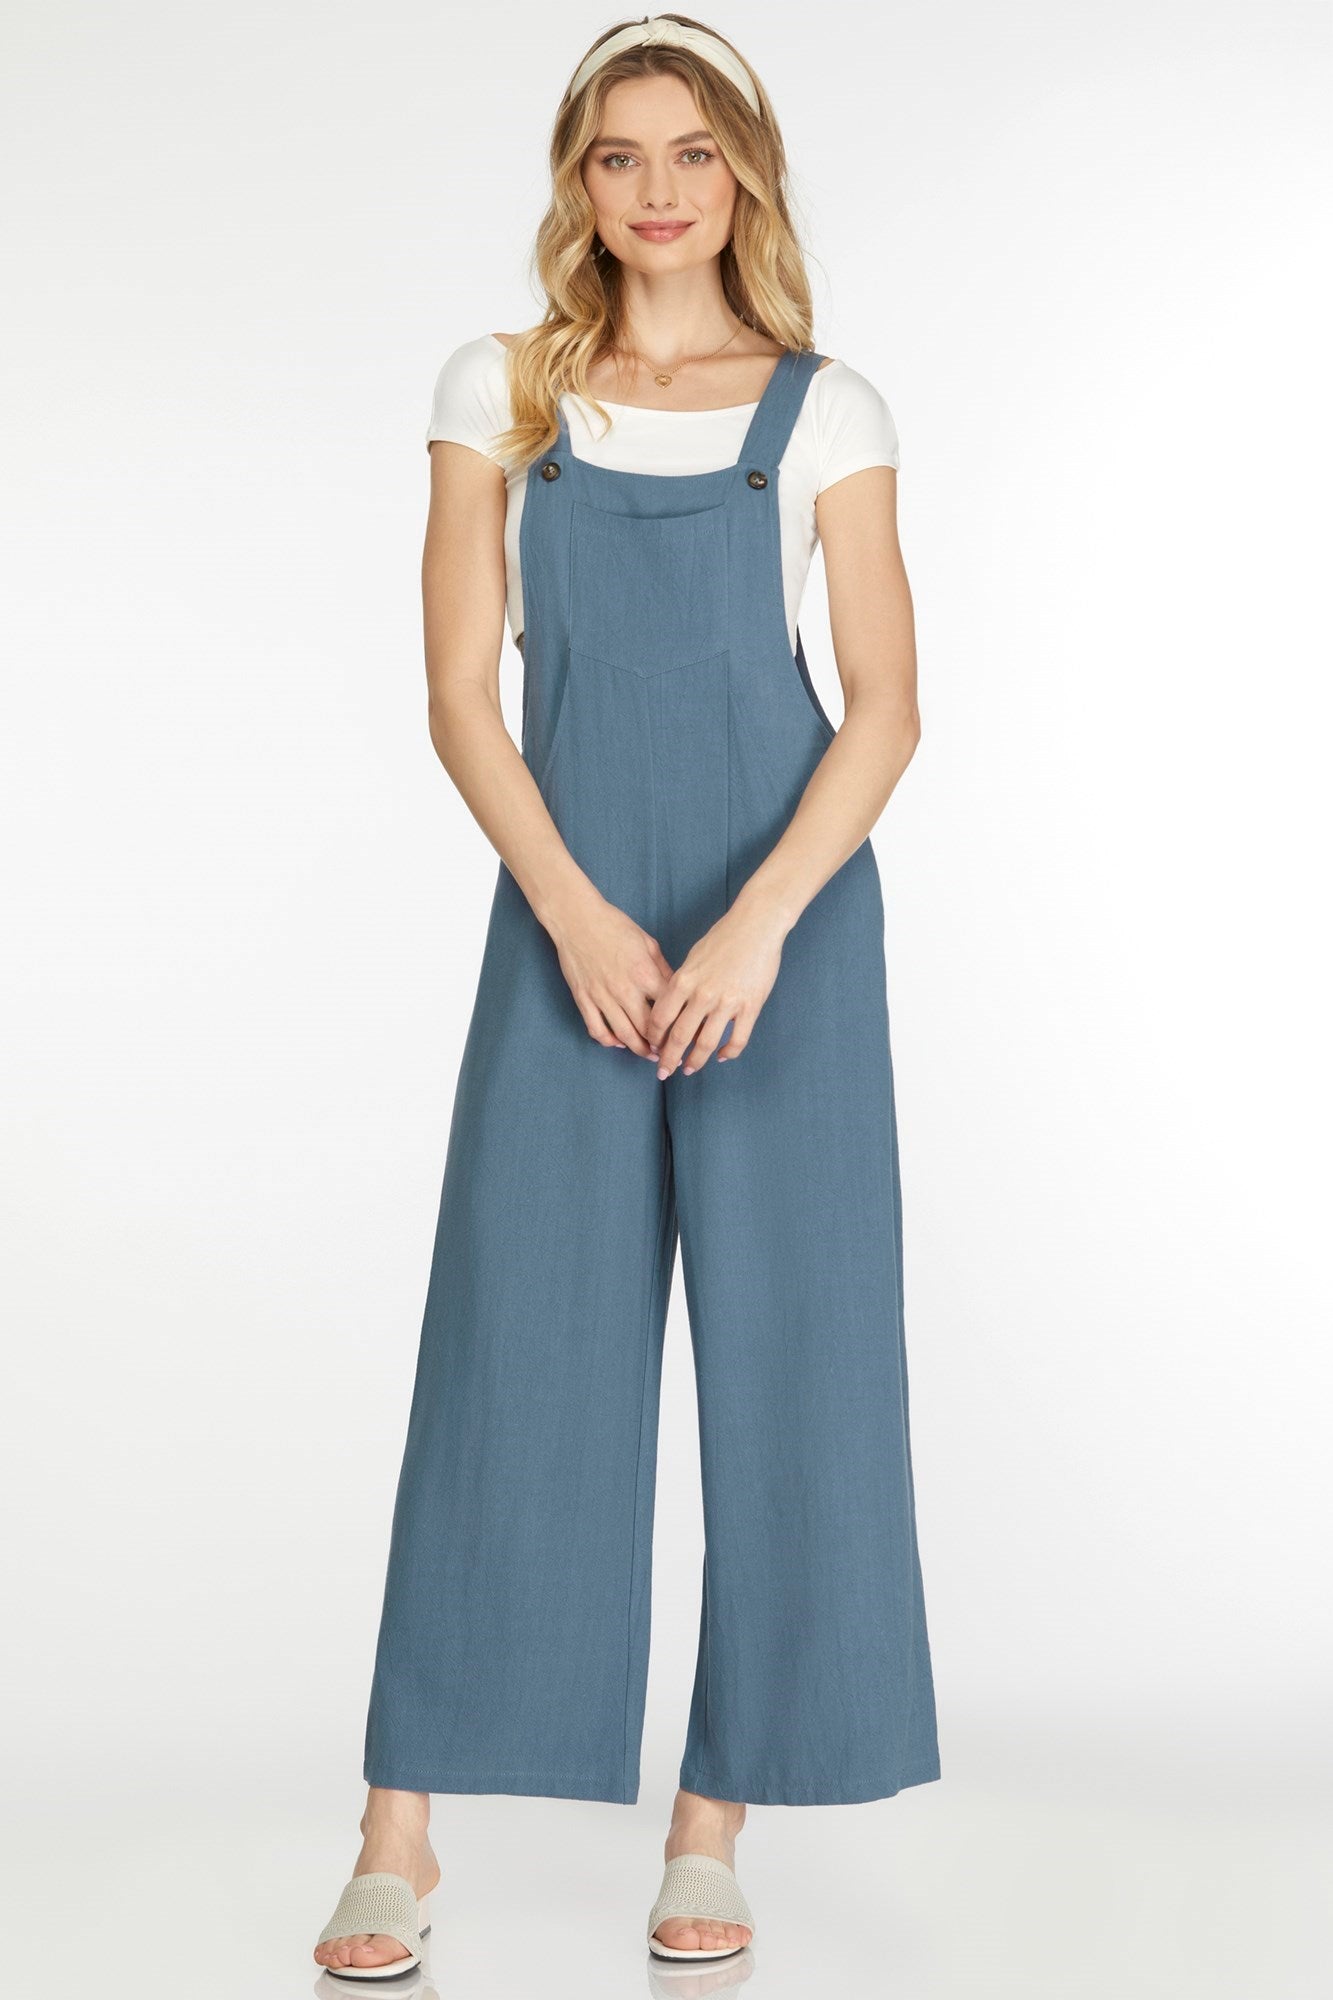 Woven Overall Jumpsuit w/Side Pockets